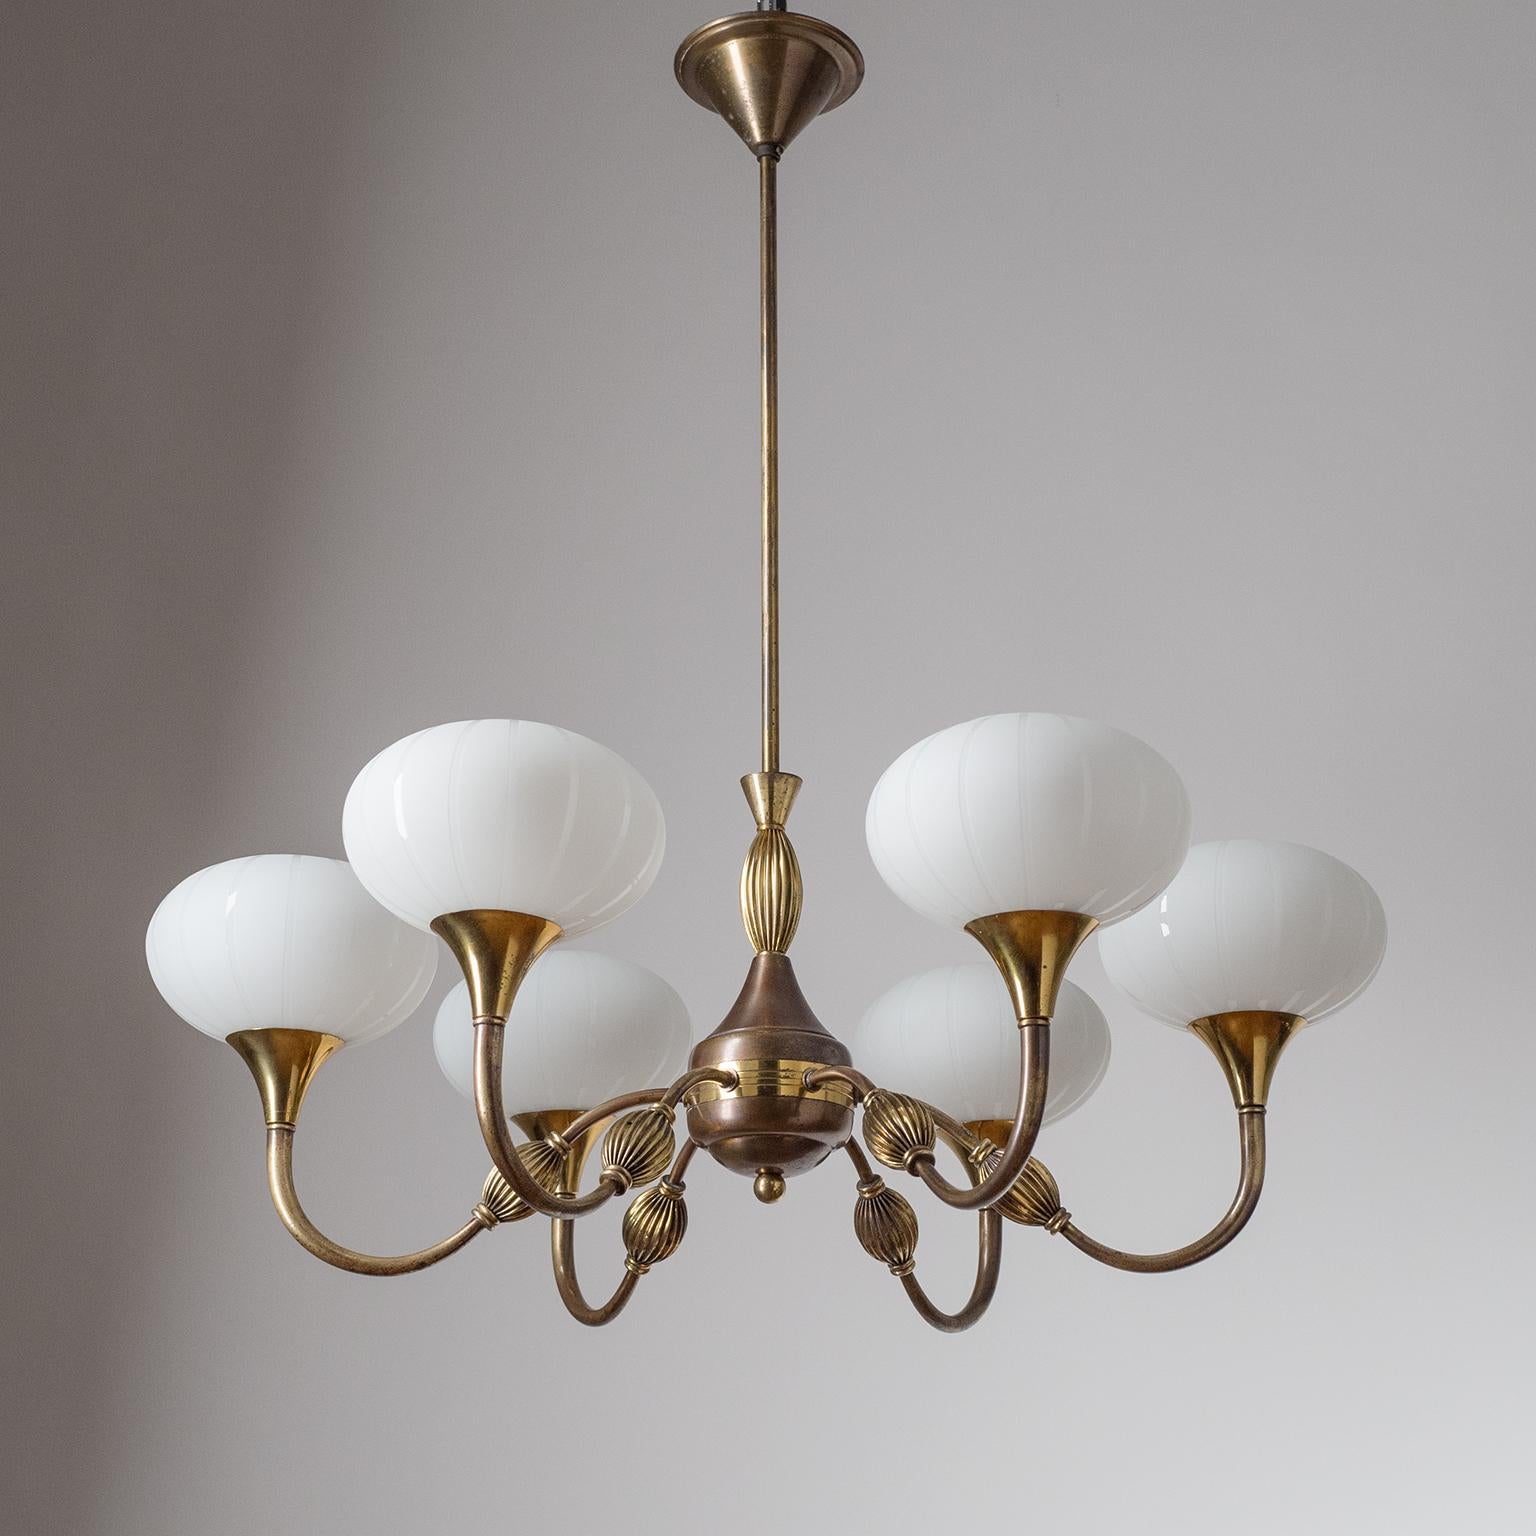 Italian six-arm brass chandelier from the 1940s. Rare 'pleated' brass decorations on arms and body and blown milk glass diffusers with satin-etched stripes. Original brass and ceramic E14 sockets with new wiring. Height without the stem is